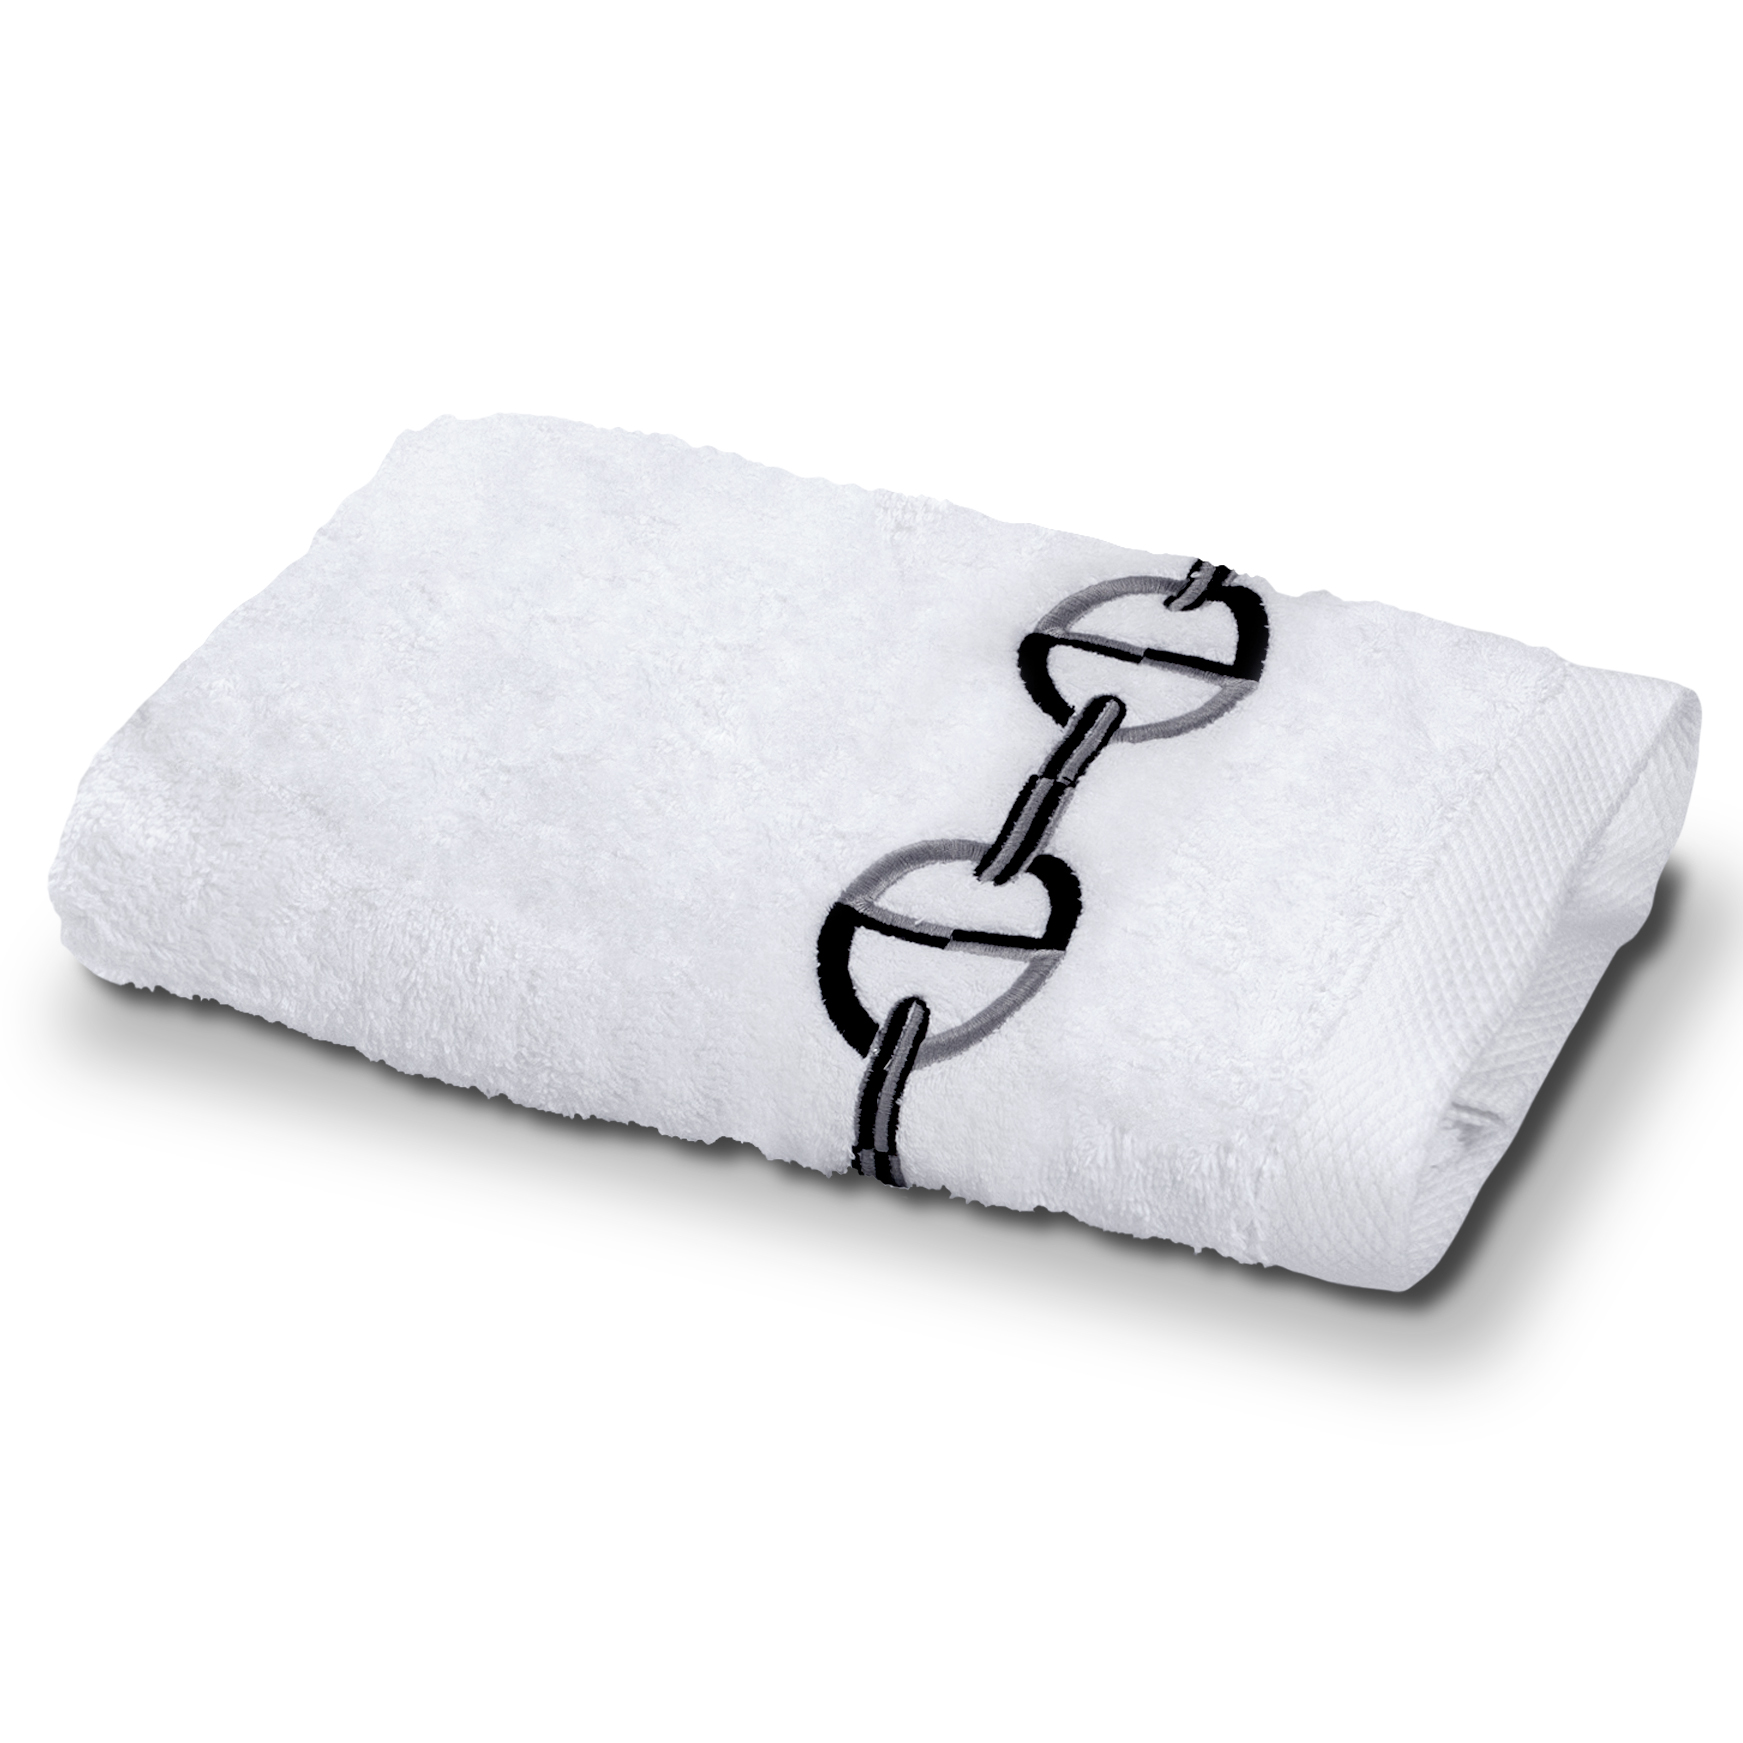 White Terry Towels